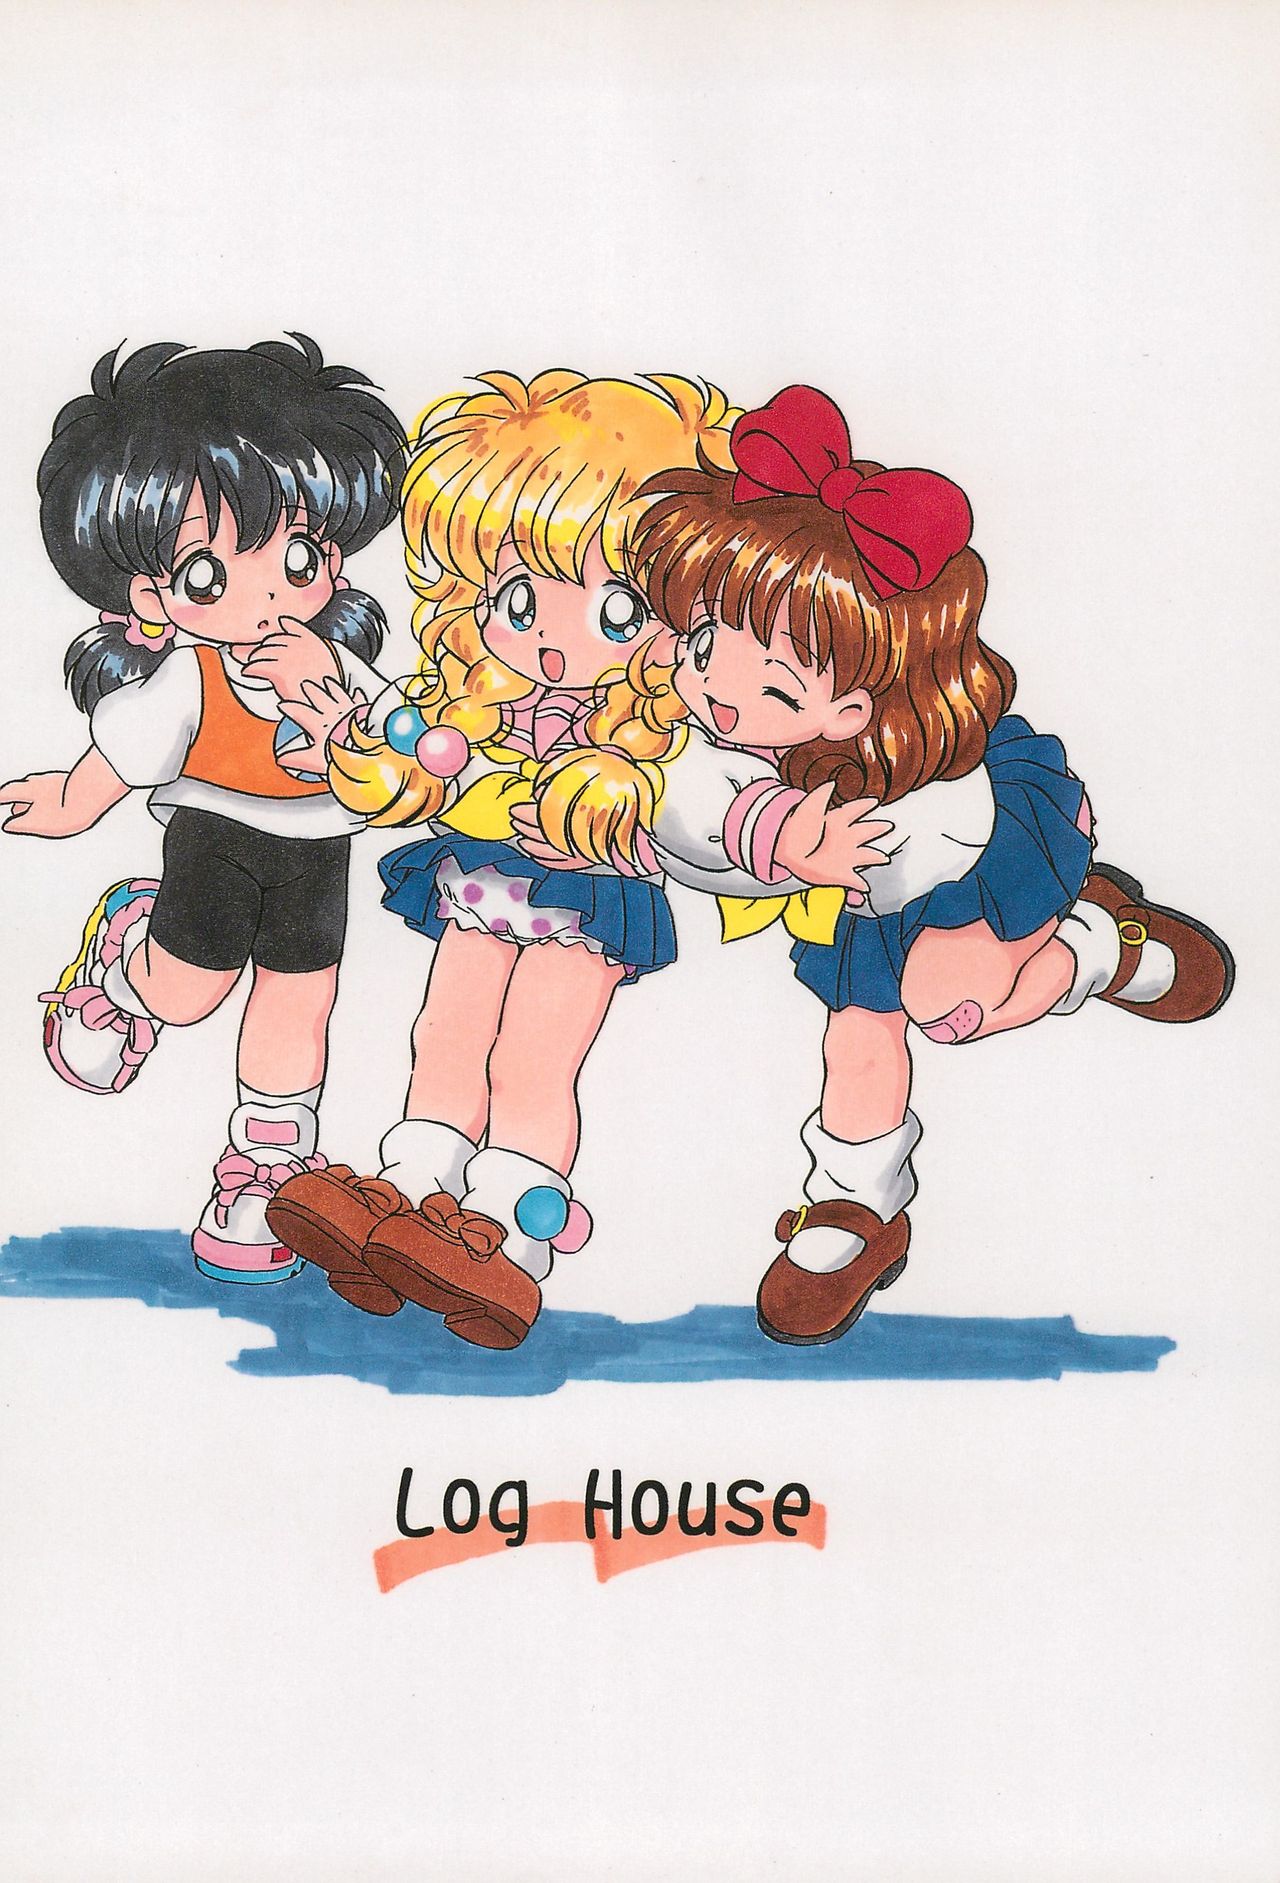 [Log House (戦艦大和煮)] I CAN’T GIVE YOU ANYTHING BUT LOVE, BABY